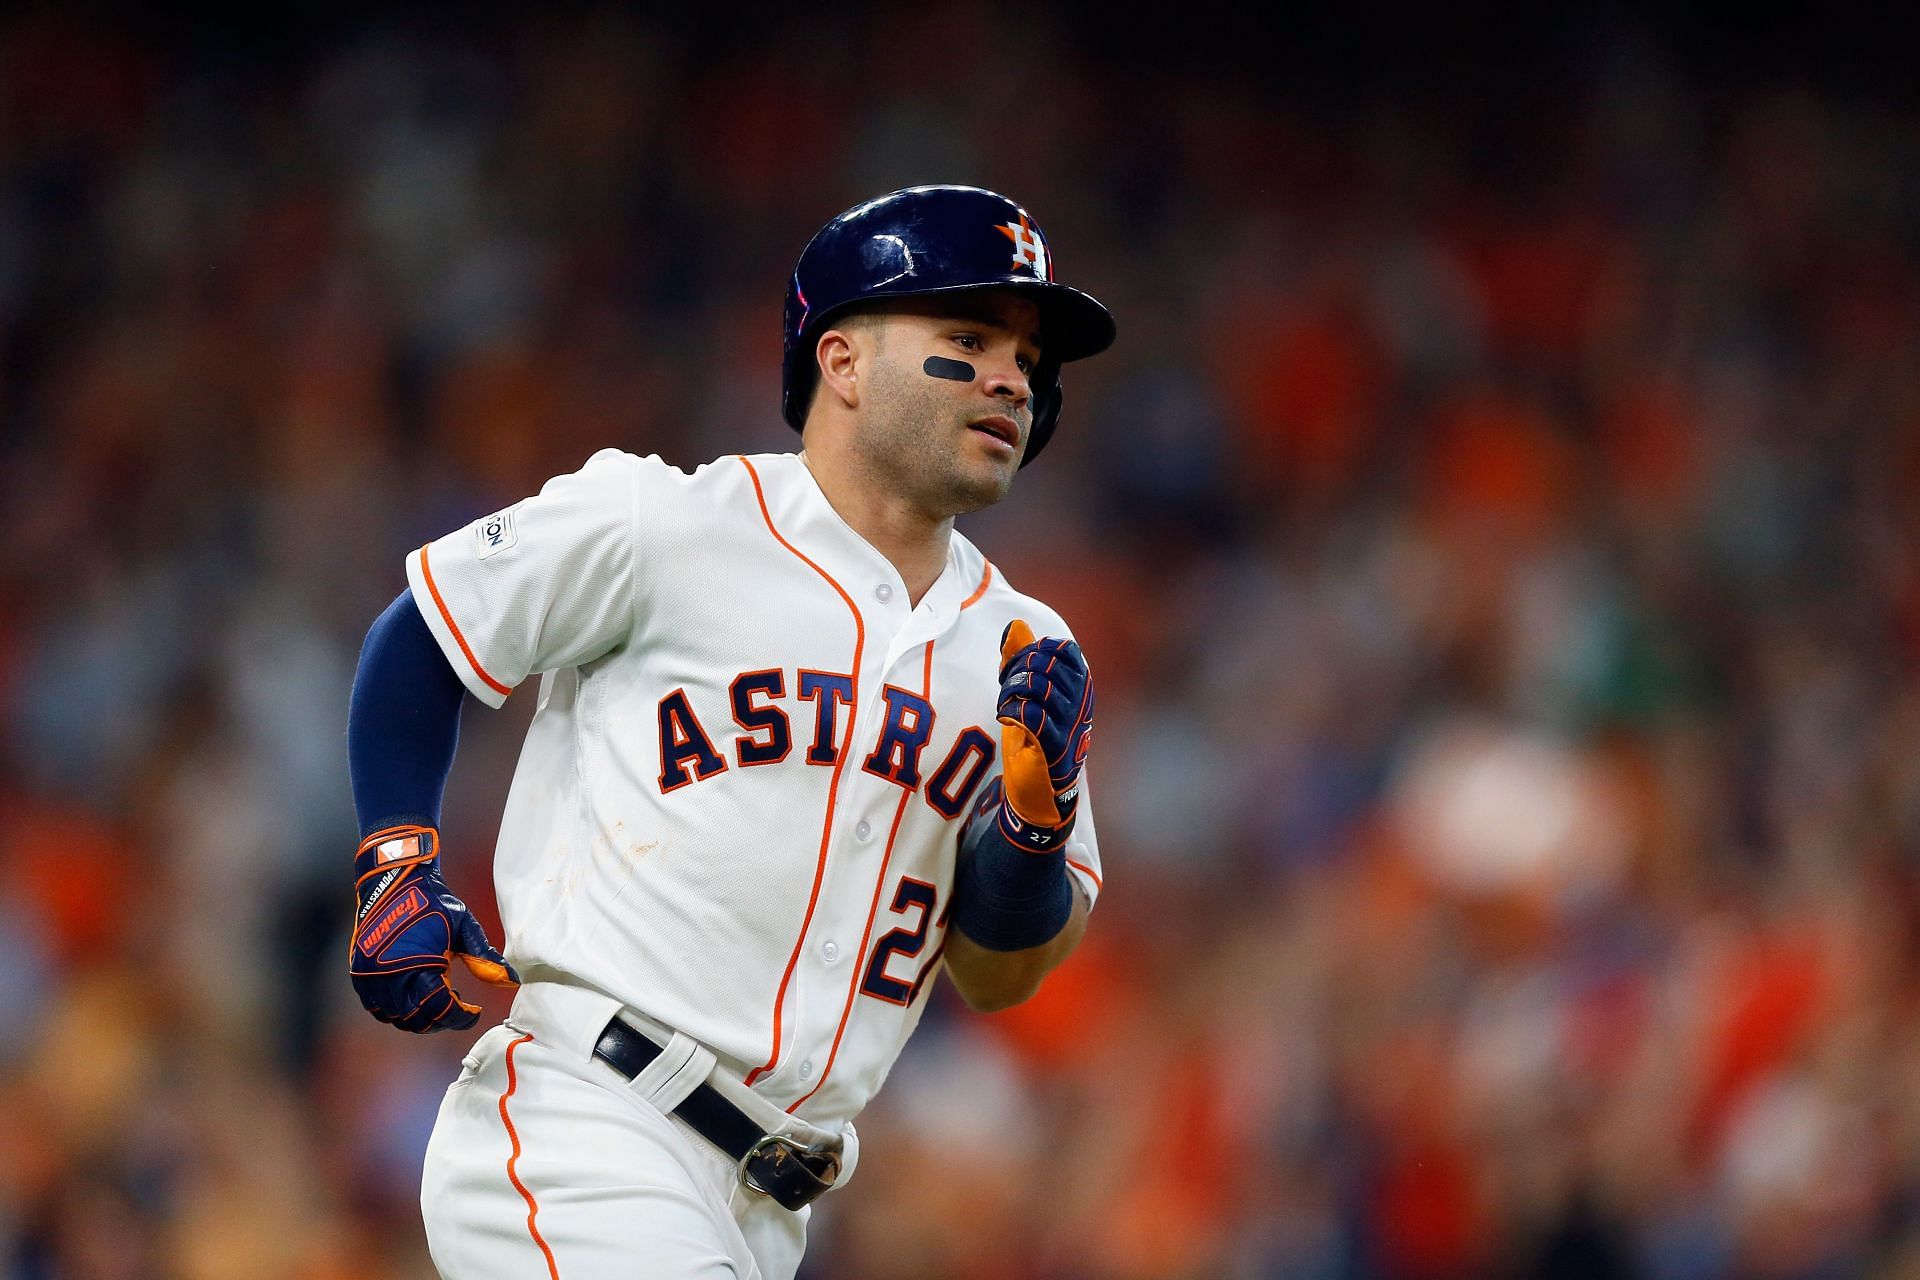 Is Jose Altuve Really This Humble? Astros Star Keeps Defying